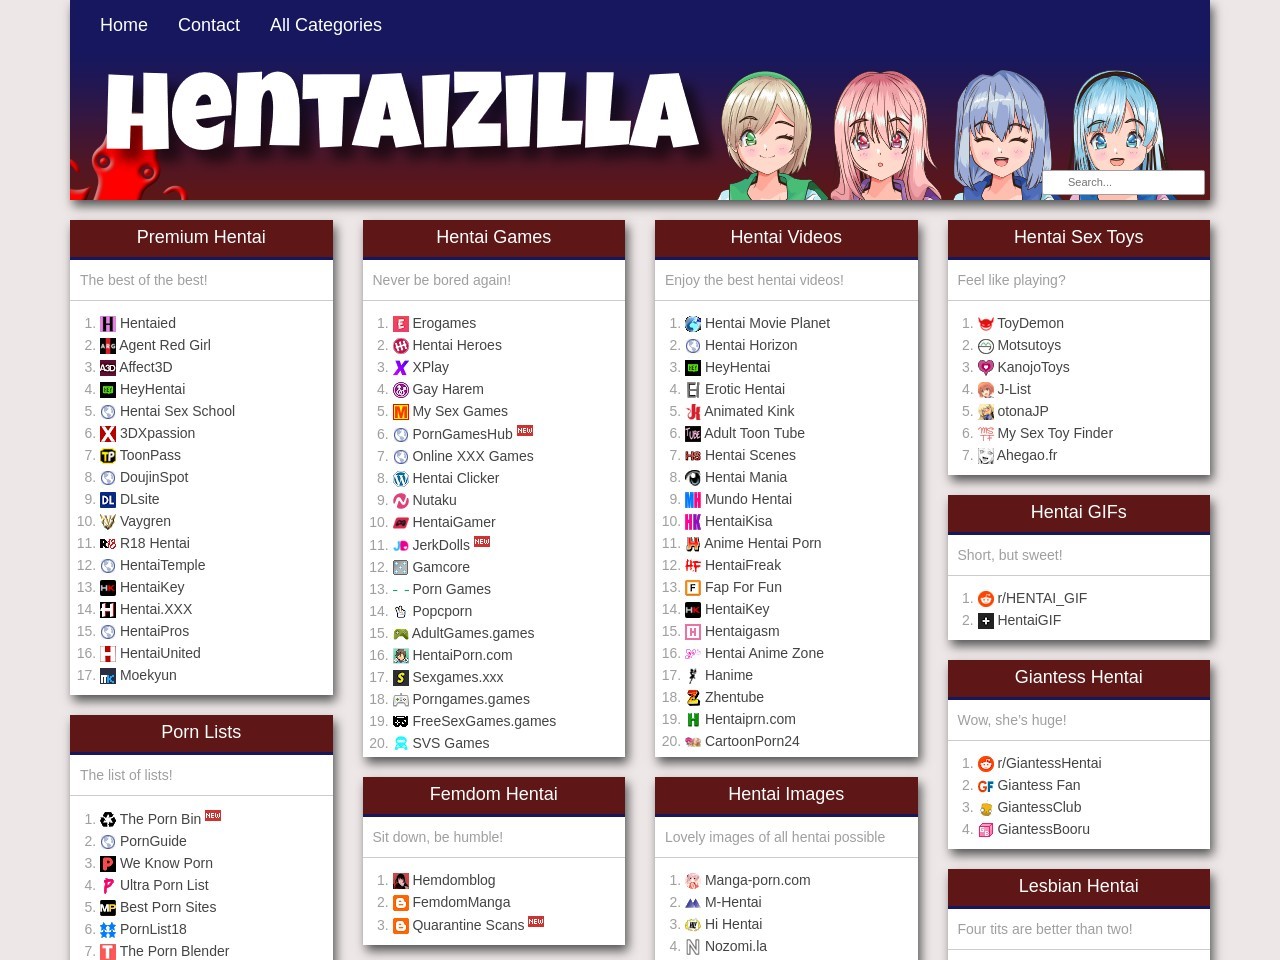 Hentai Movie Planet - HentaiZilla and Similar Best Hentai Porn Sites | The Porn Bin